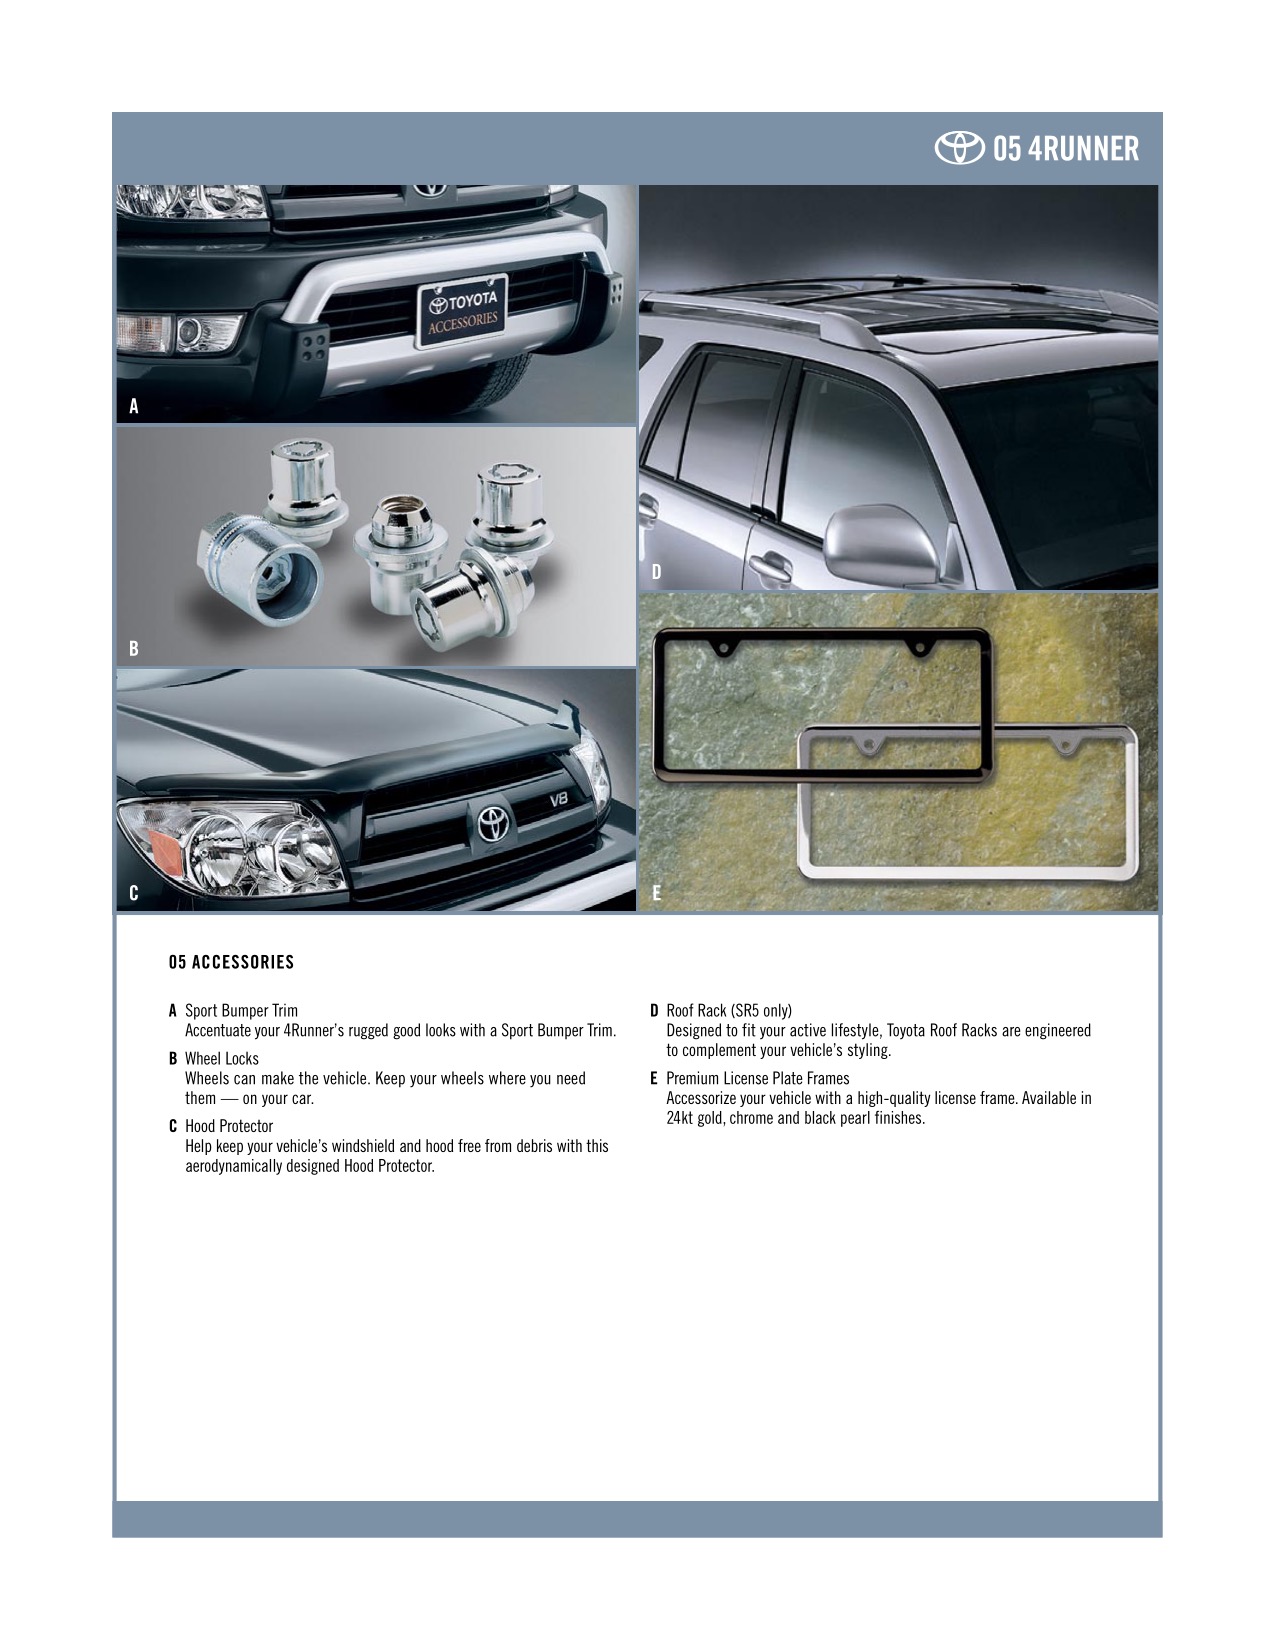 2005 Toyota 4Runner Brochure Page 1